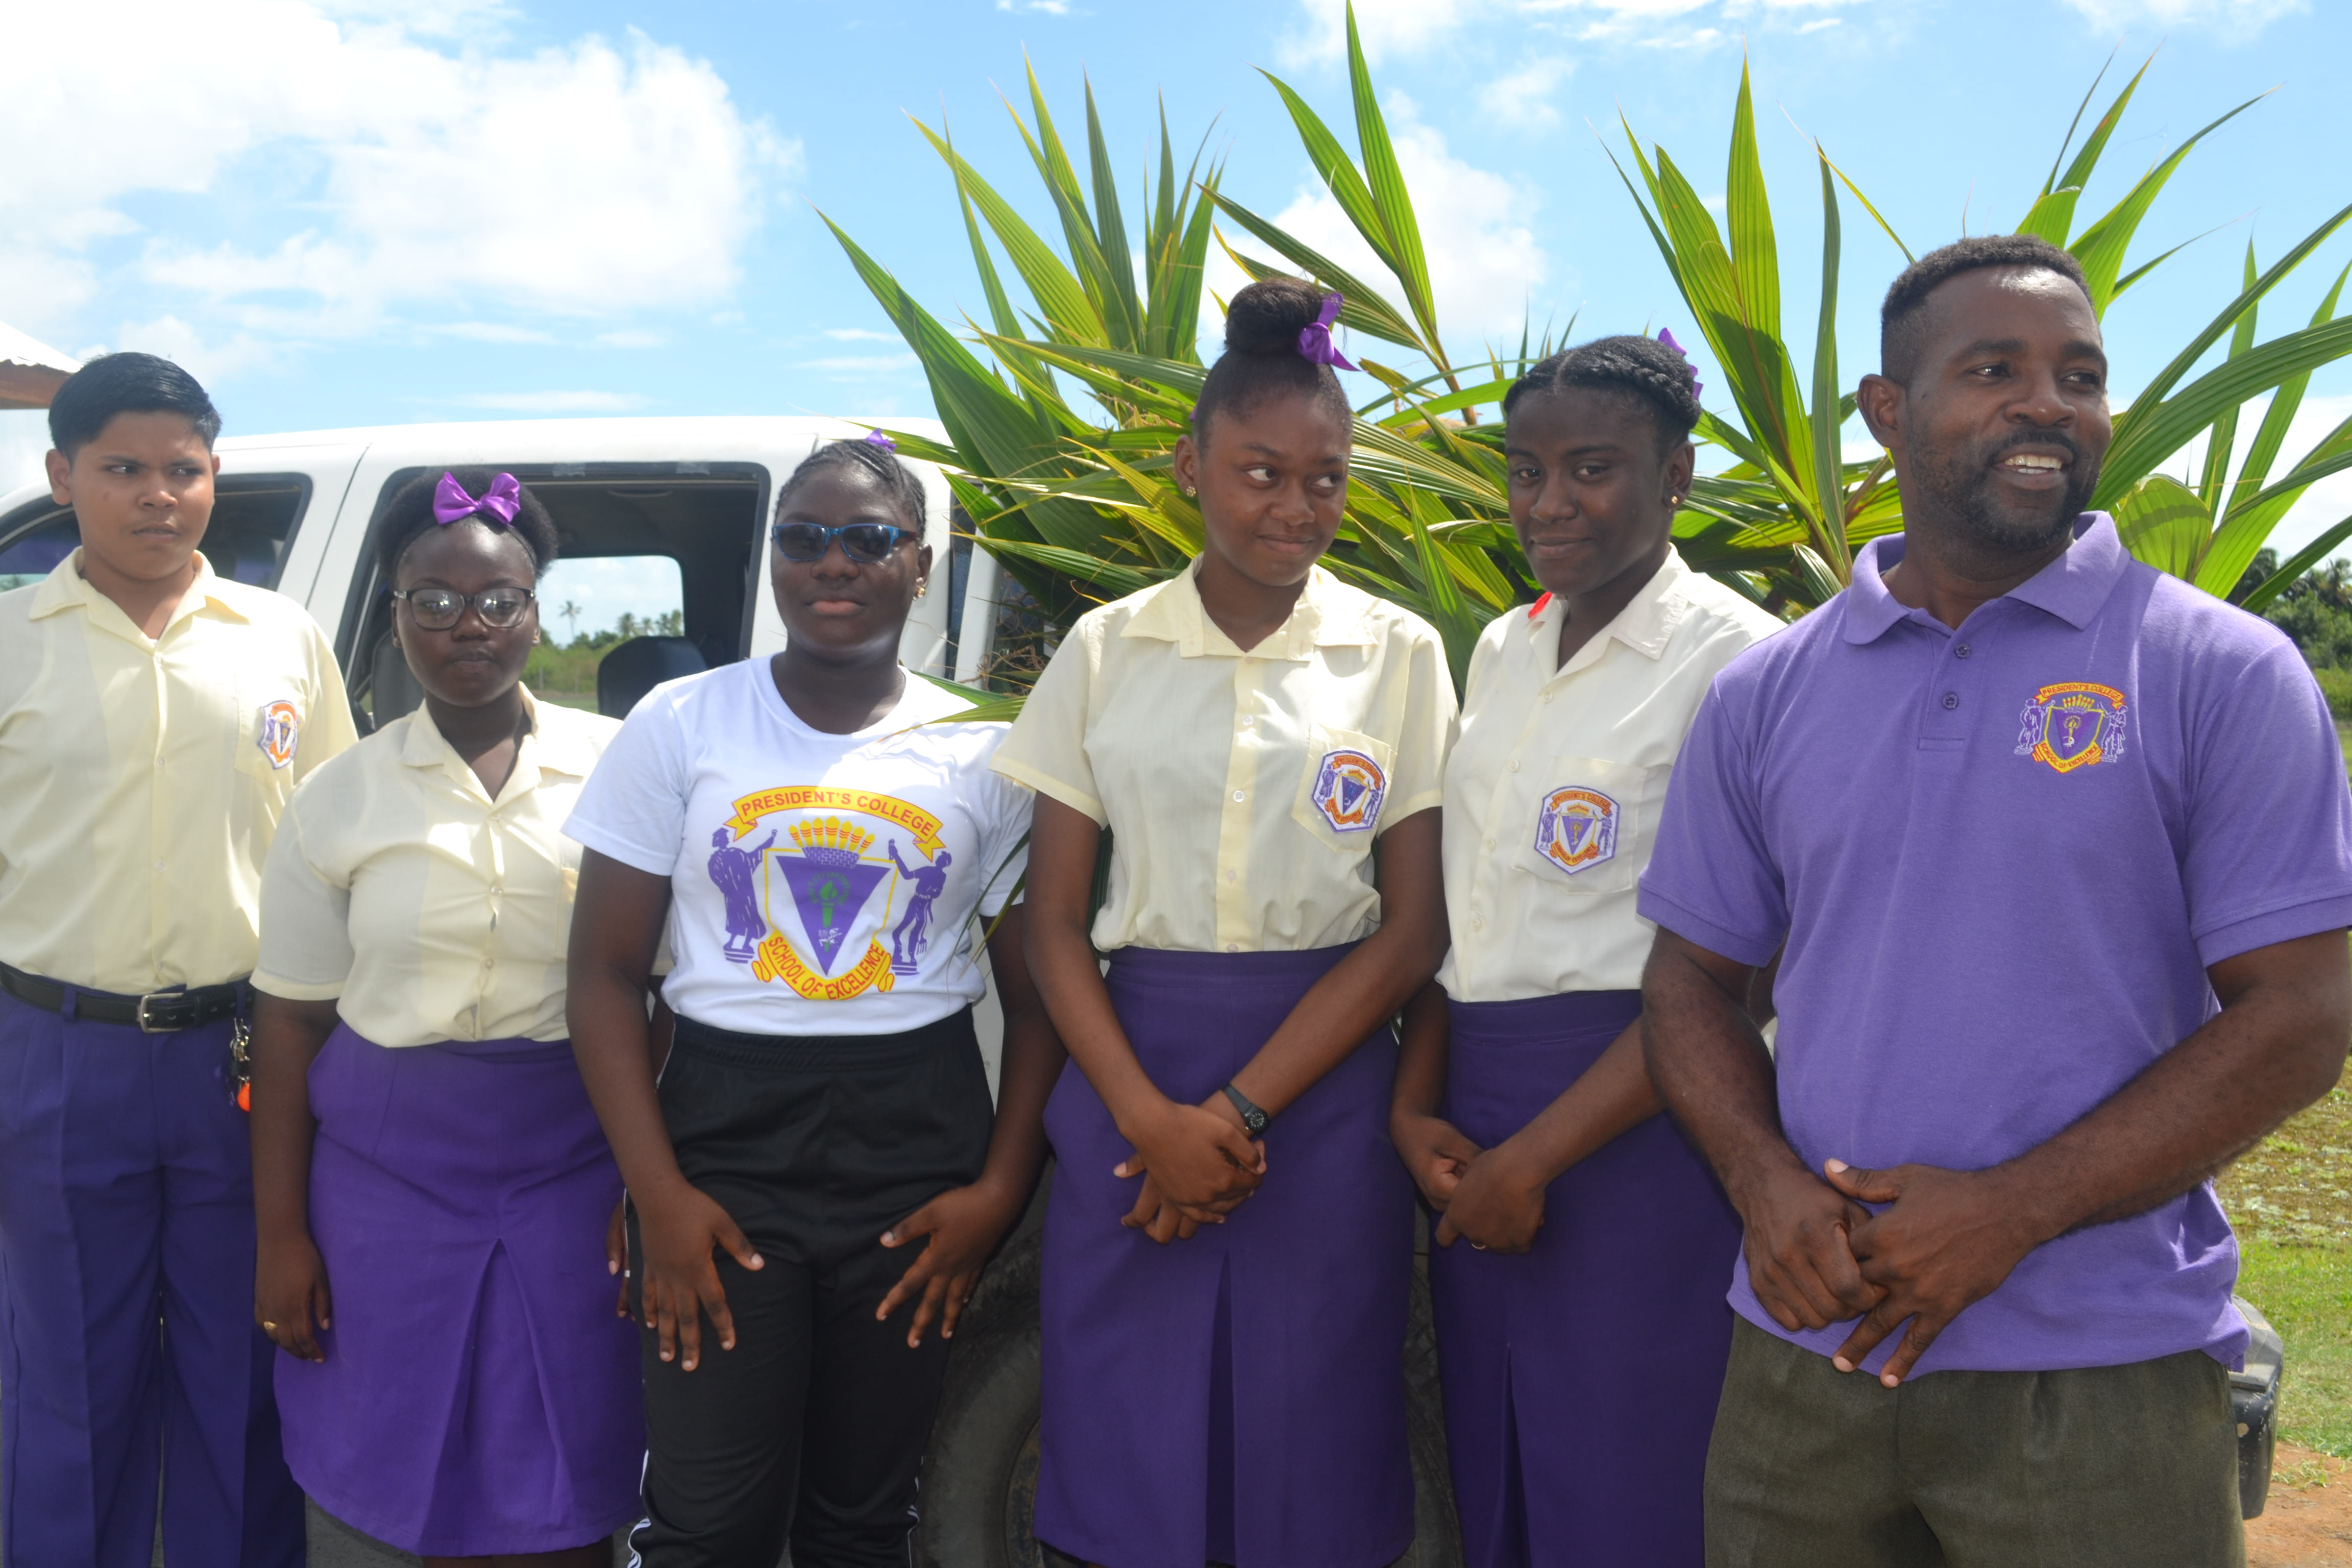 Head of the Agriculture Science Department at President's College, Mr. Cranston Richmond with some of the school's agriculture science students